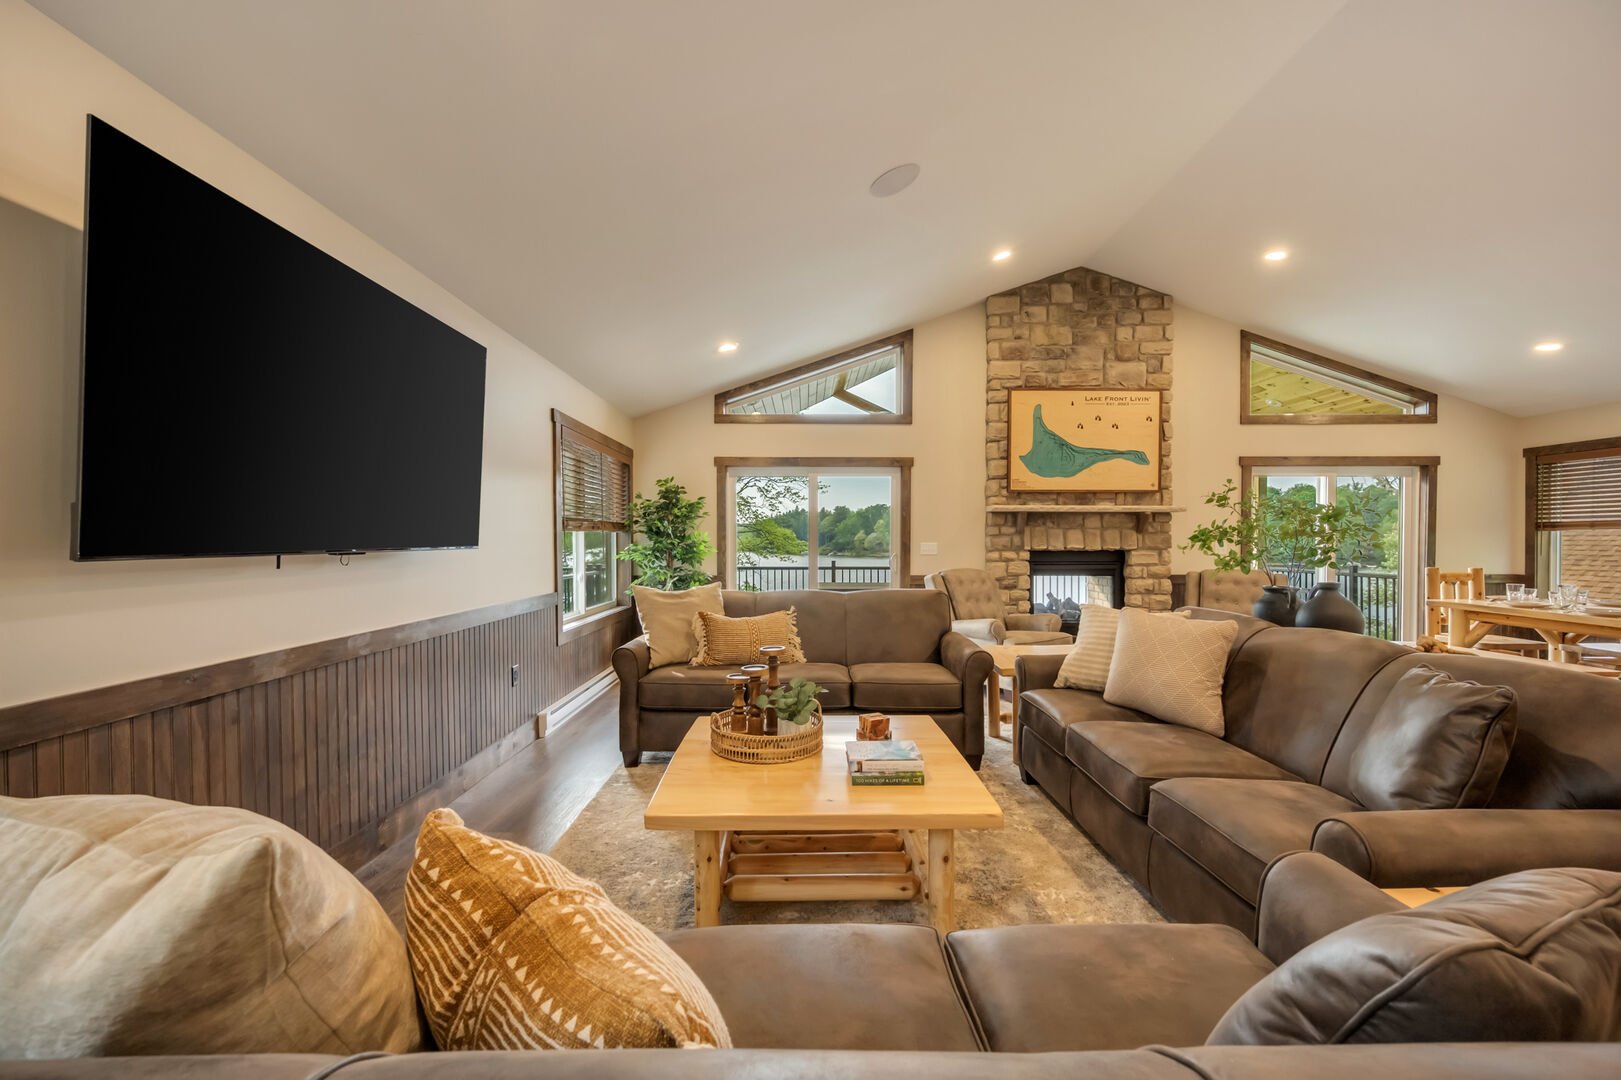 Comfy and Cozy.
Large and Comfortable Sofas in the Great Room provide the perfect space for Chatting with Family and Friend or Lounging while watching the Large Screen Smart TV.